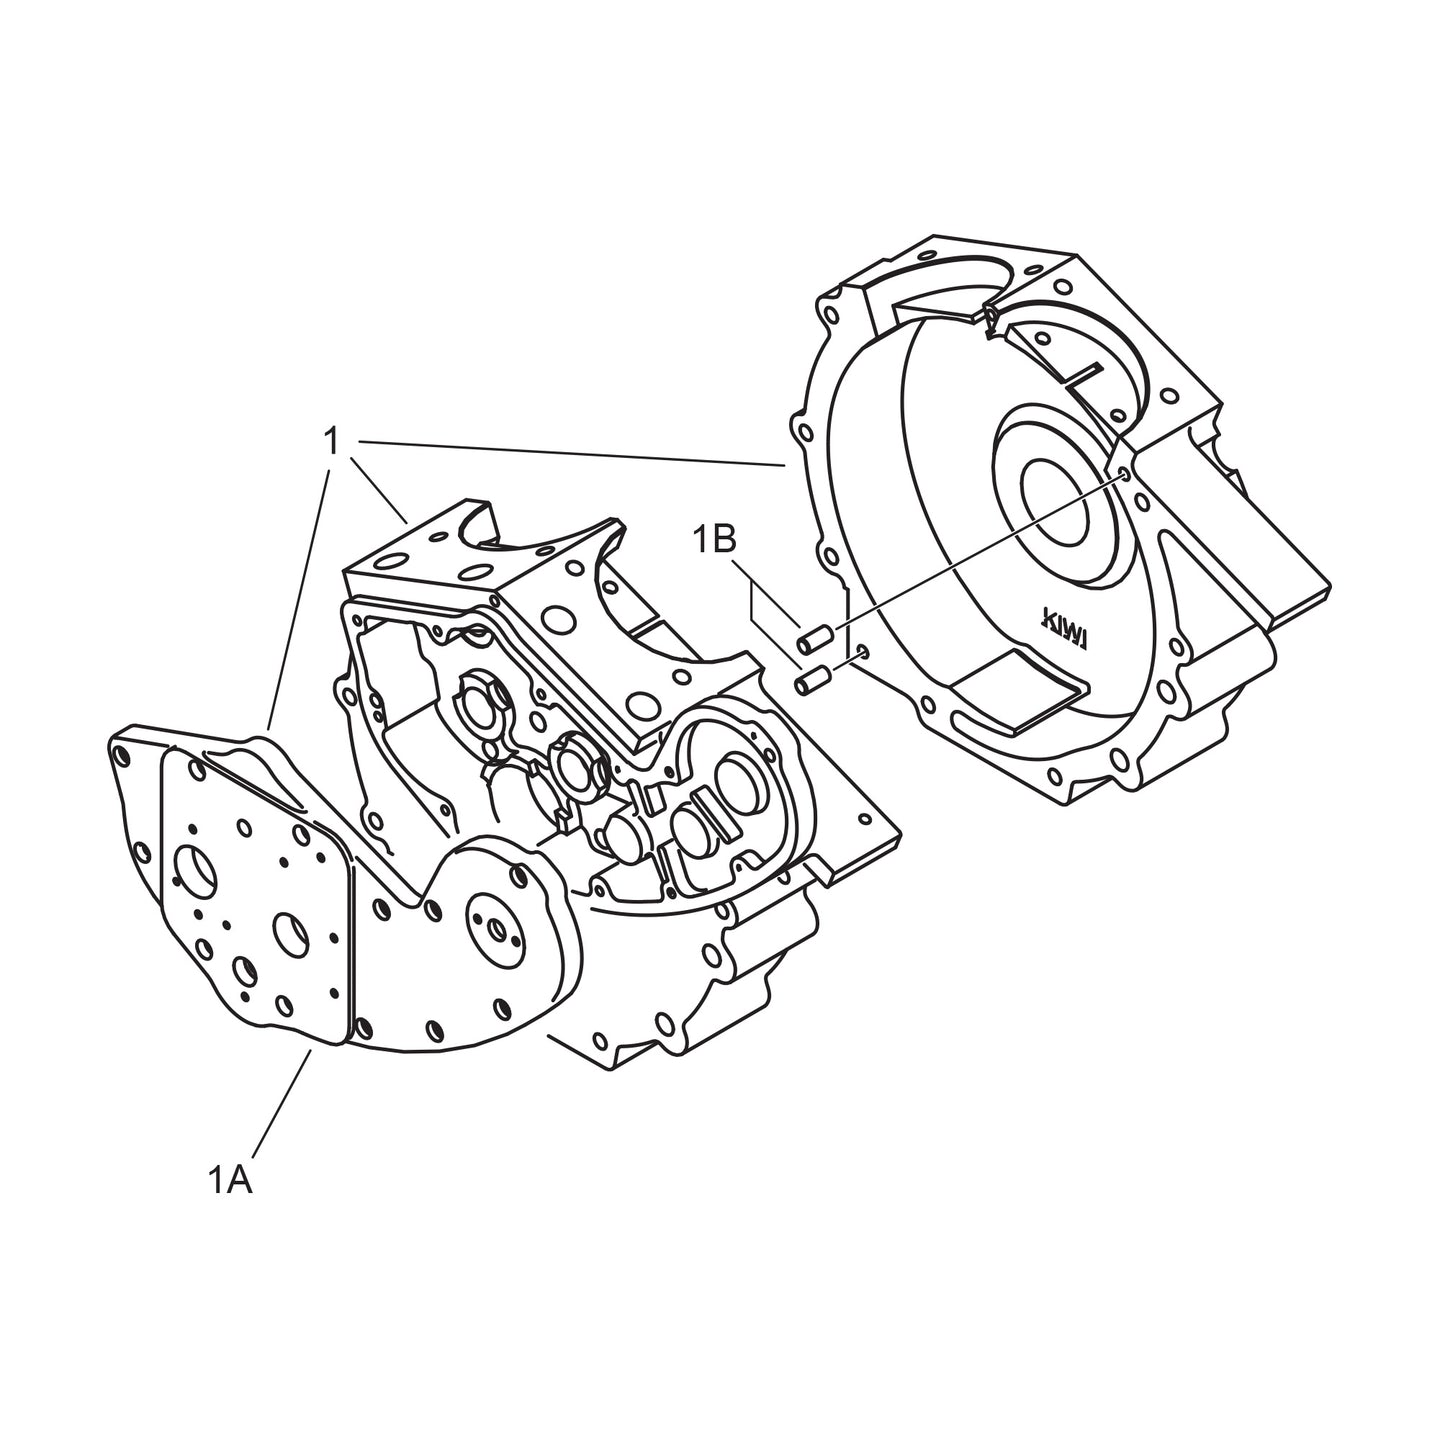 Crankcase with Breather Hole